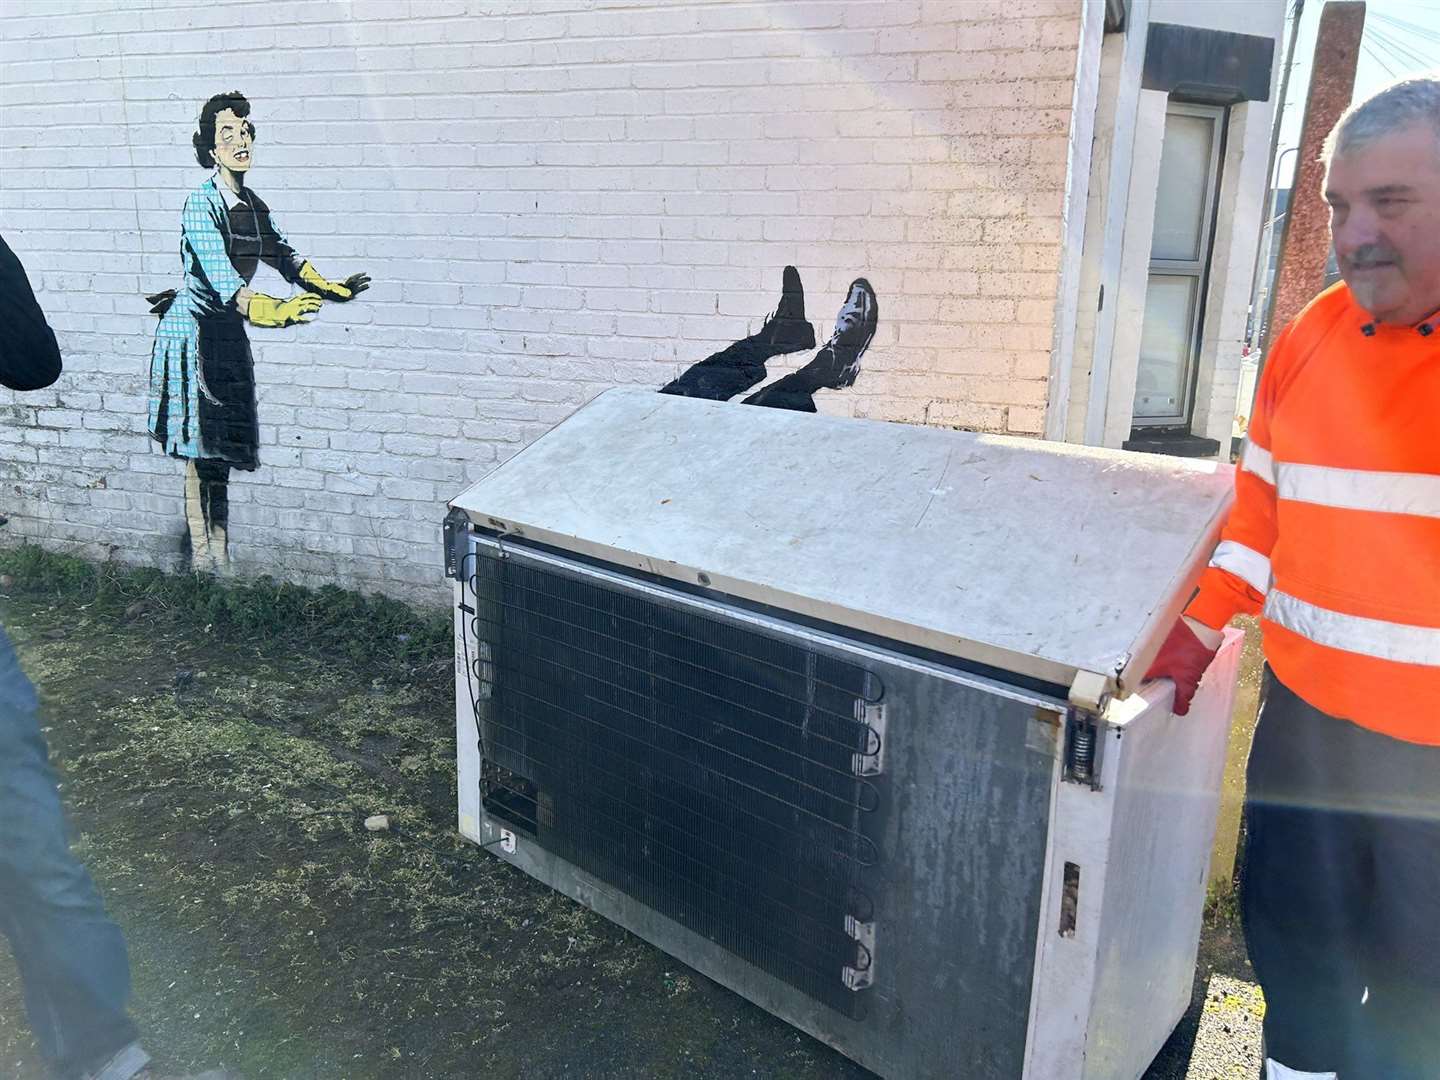 Thanet District Council removing the chest freezer from the Banksy artwork in Margate. Picture: Dan Bambridge-Higgins